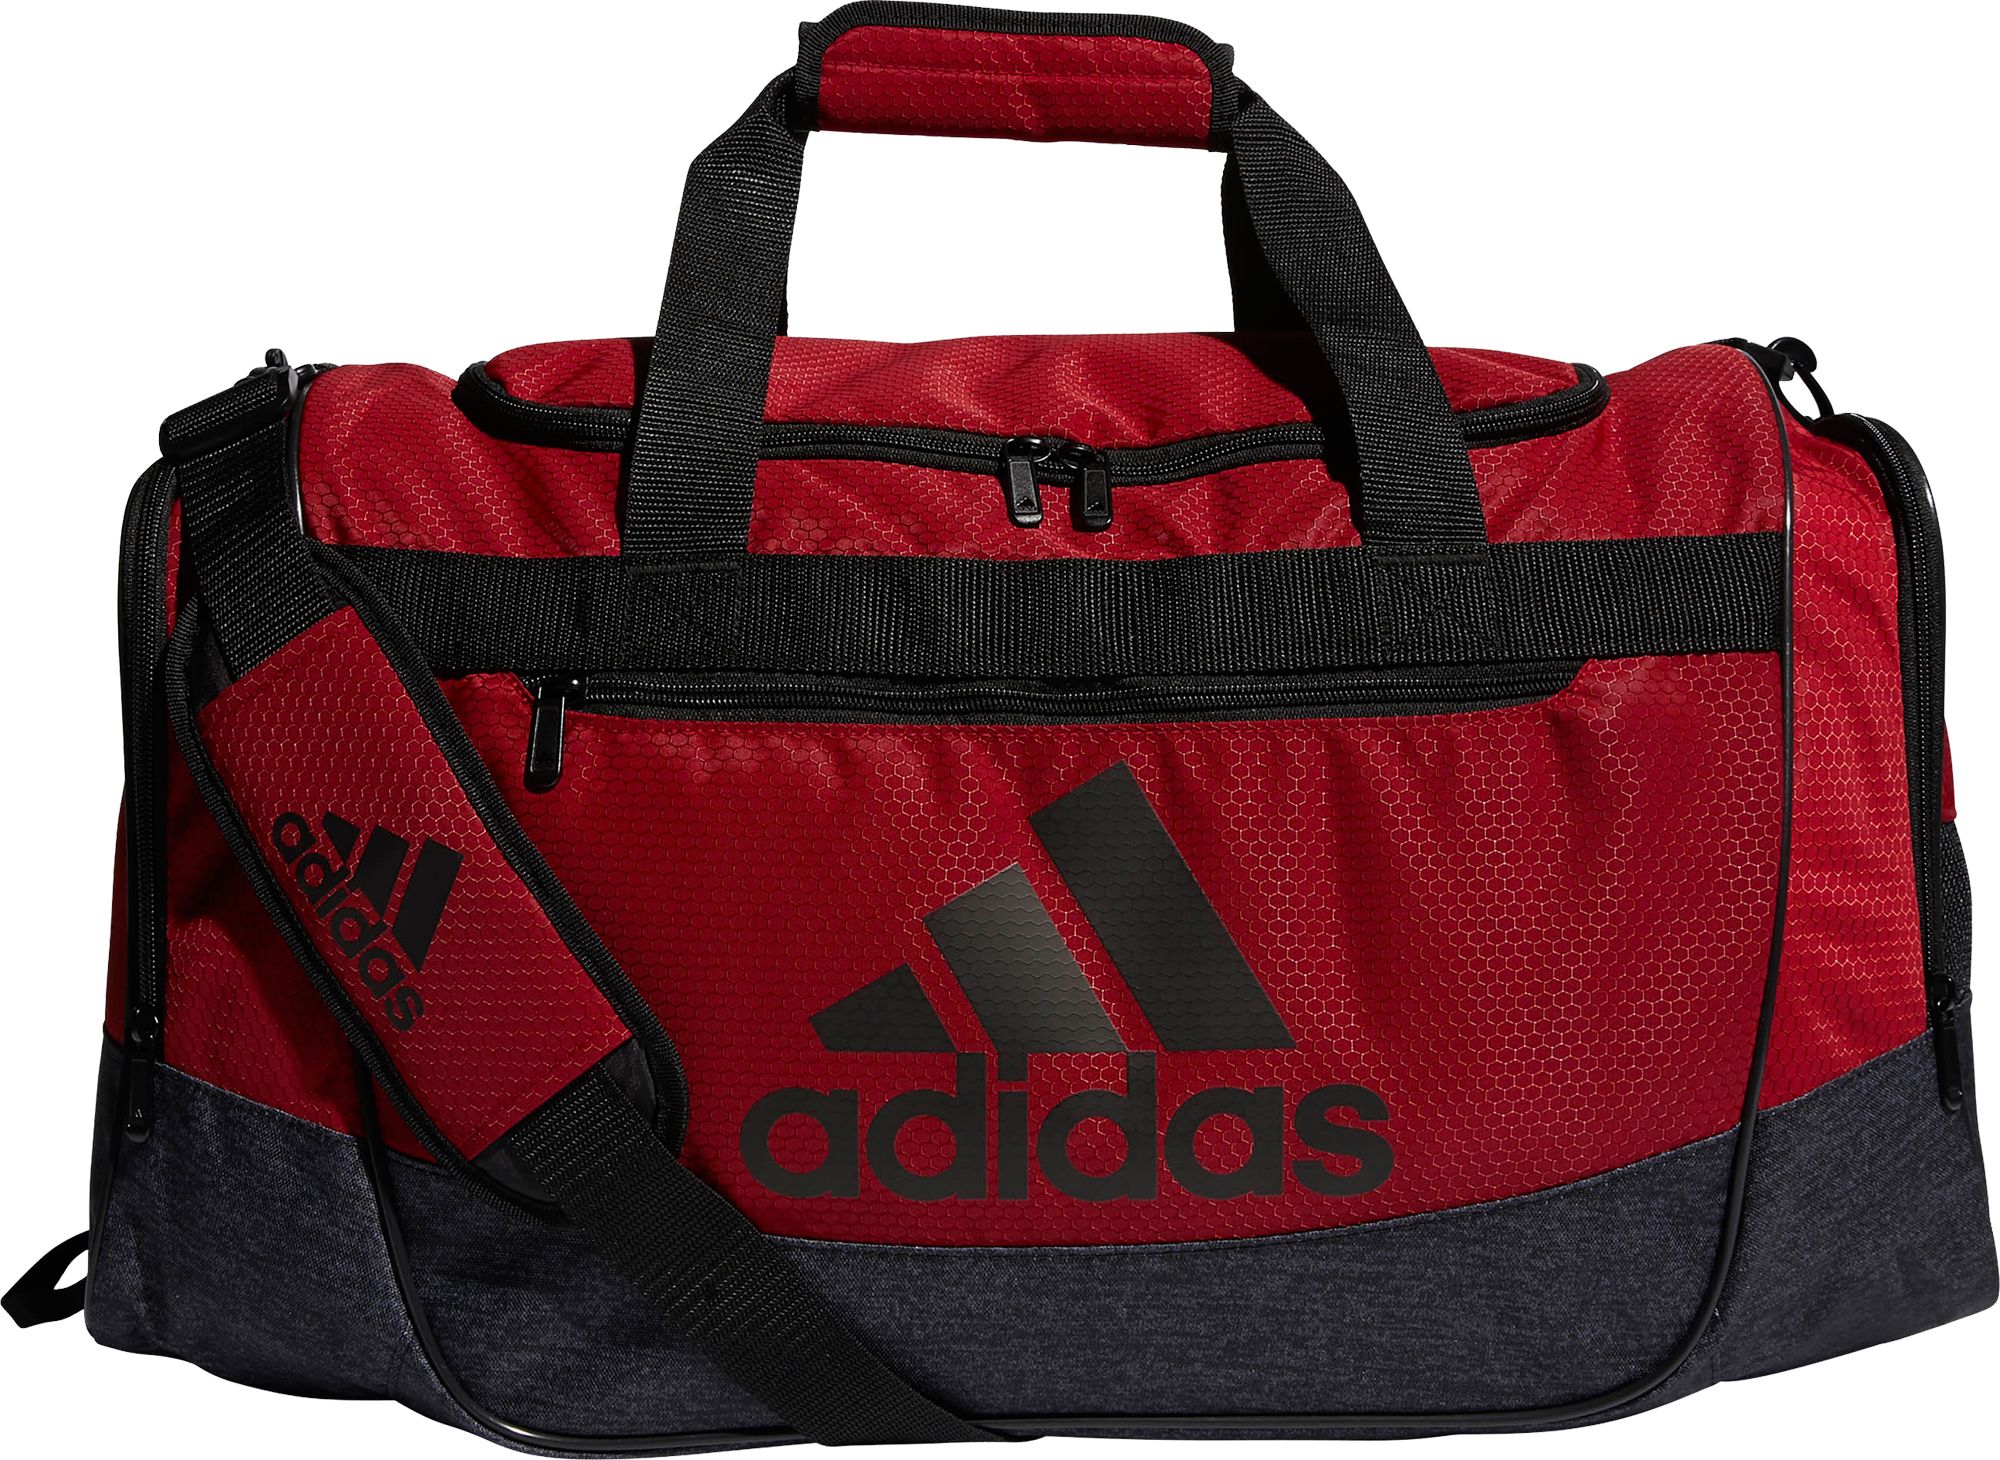 cost of adidas bags